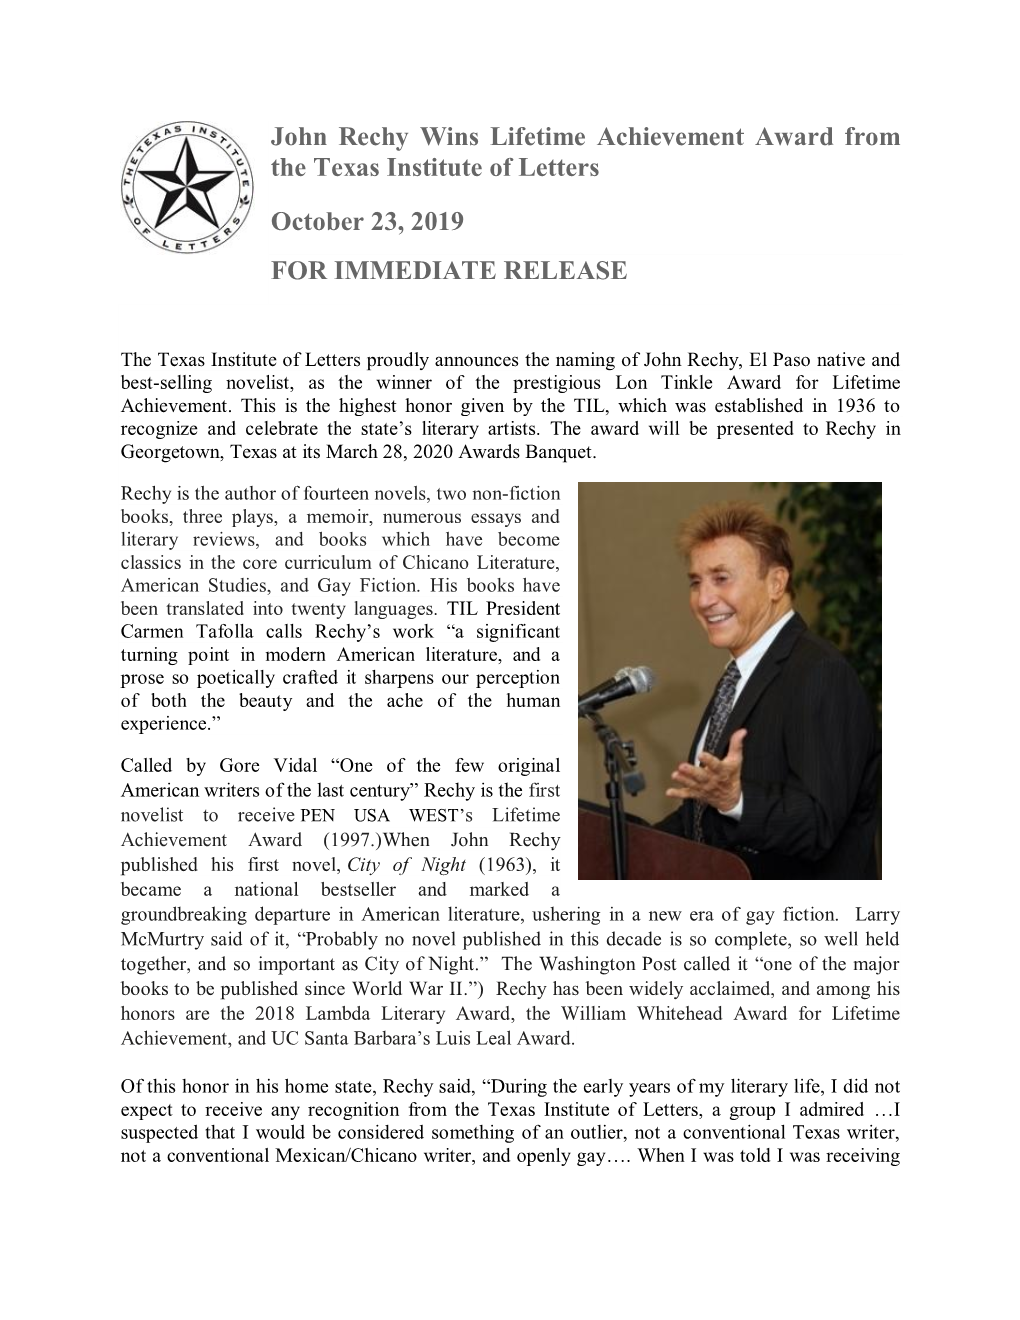 John Rechy Wins Lifetime Achievement Award from the Texas Institute of Letters